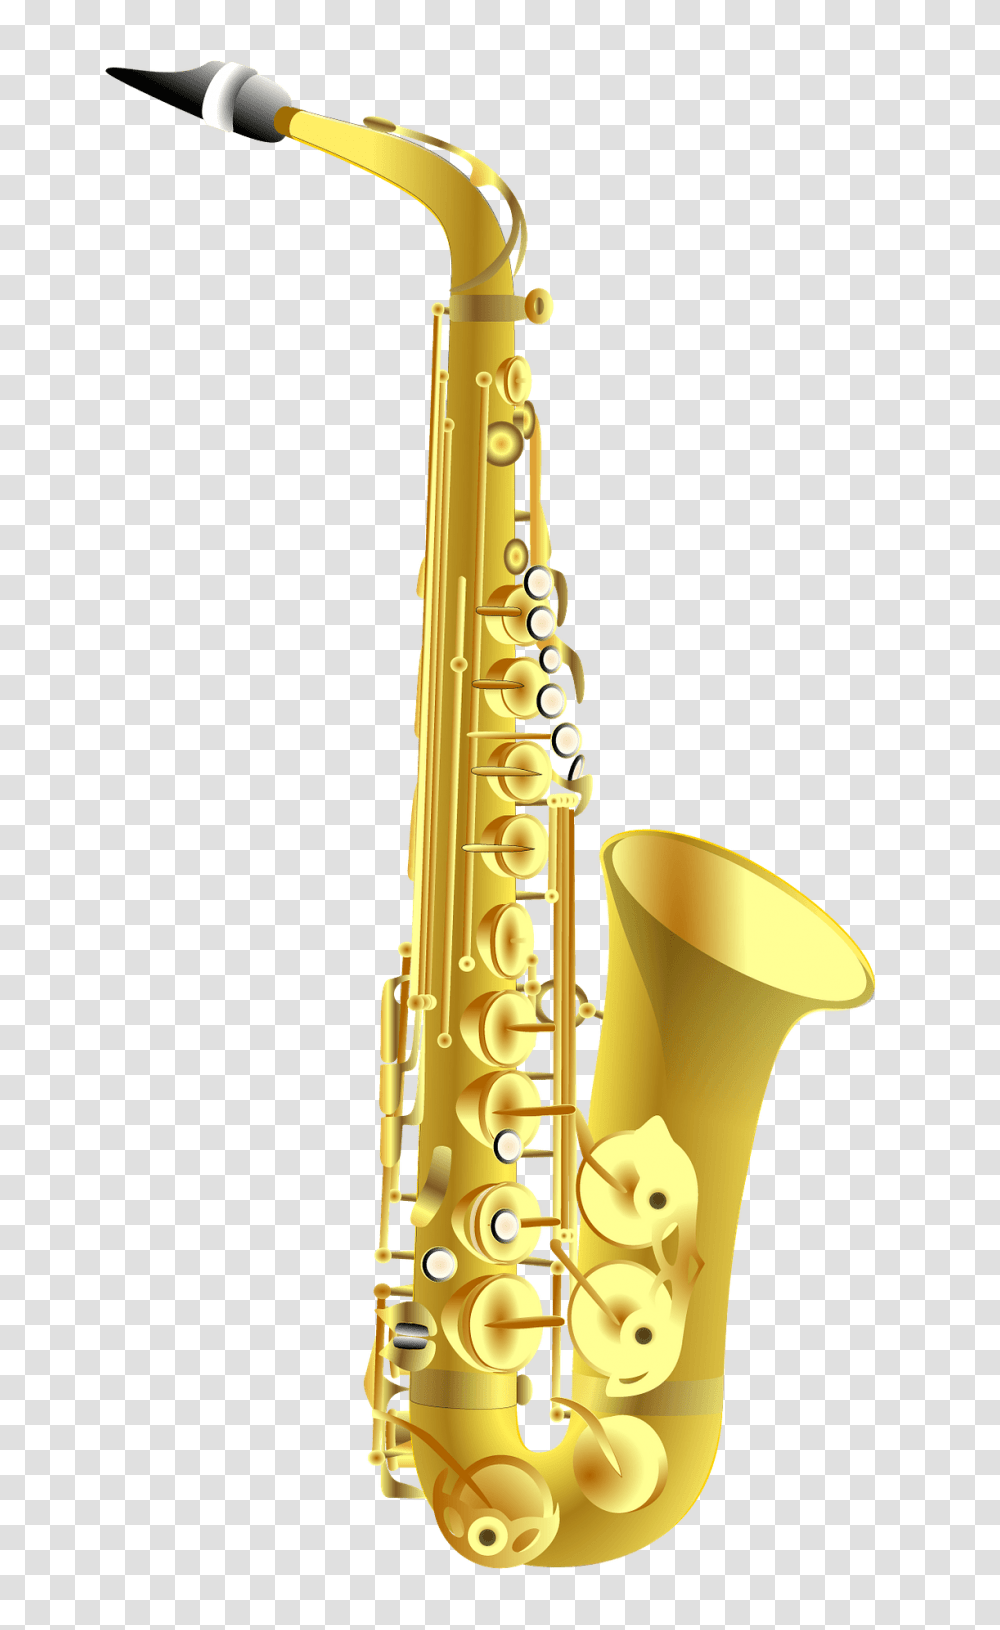 Download Free Background Instrument That Makes Loud Sound, Leisure Activities, Saxophone, Musical Instrument Transparent Png